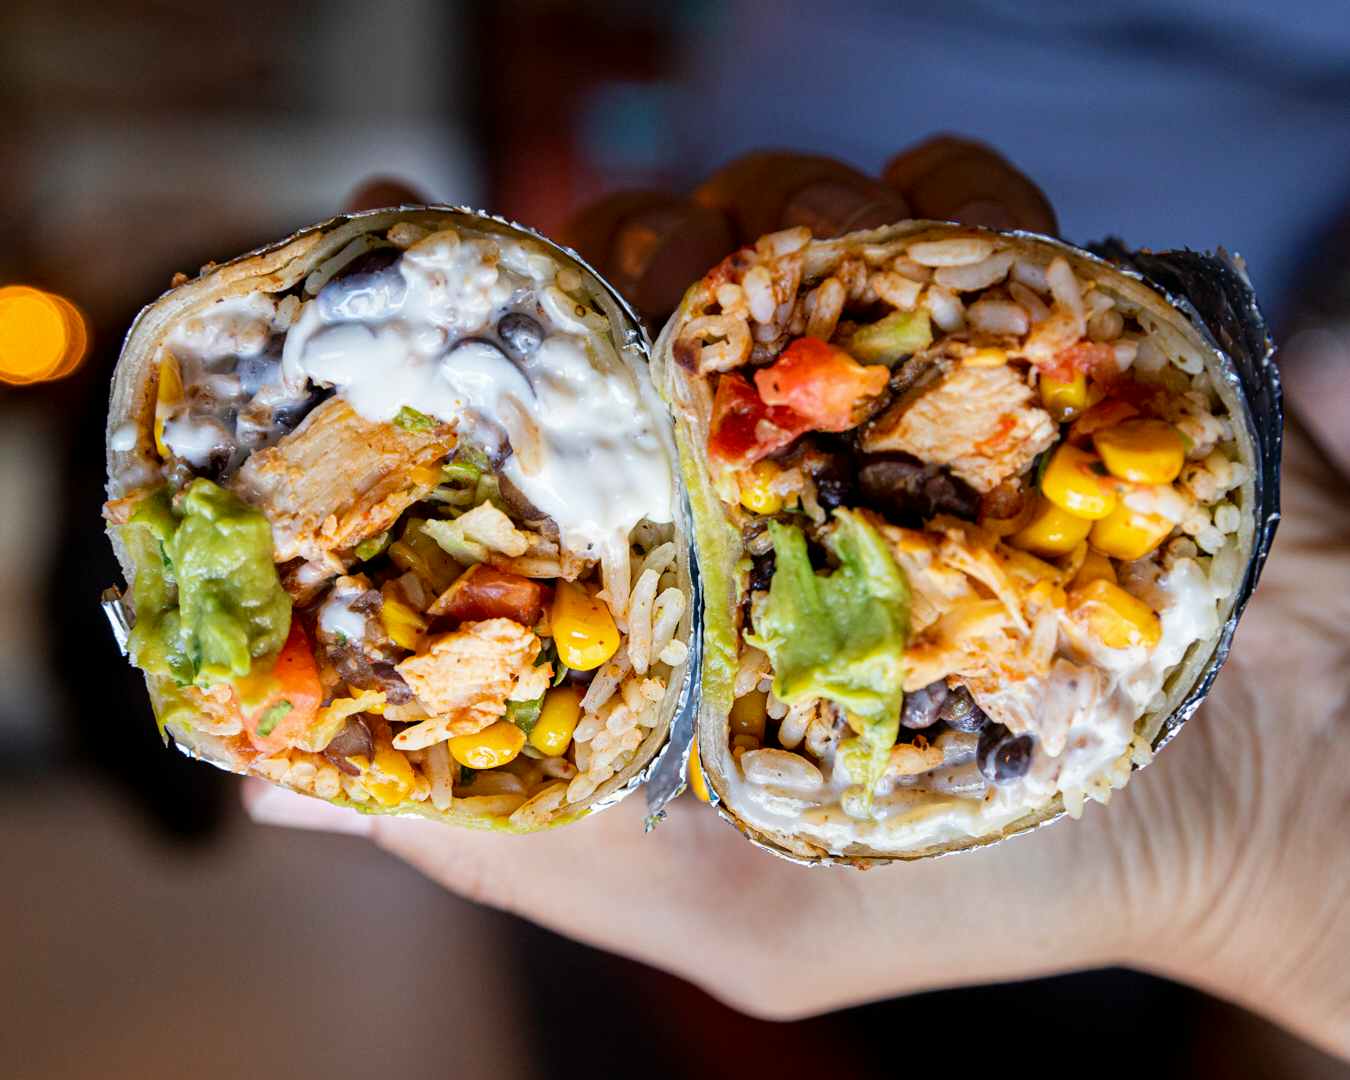 A person's hand holding up two halves of a burrito, showing the inside. The burrito is filled with meat, cheese, beans, rice, vegetables, sour cream, and guacamole.